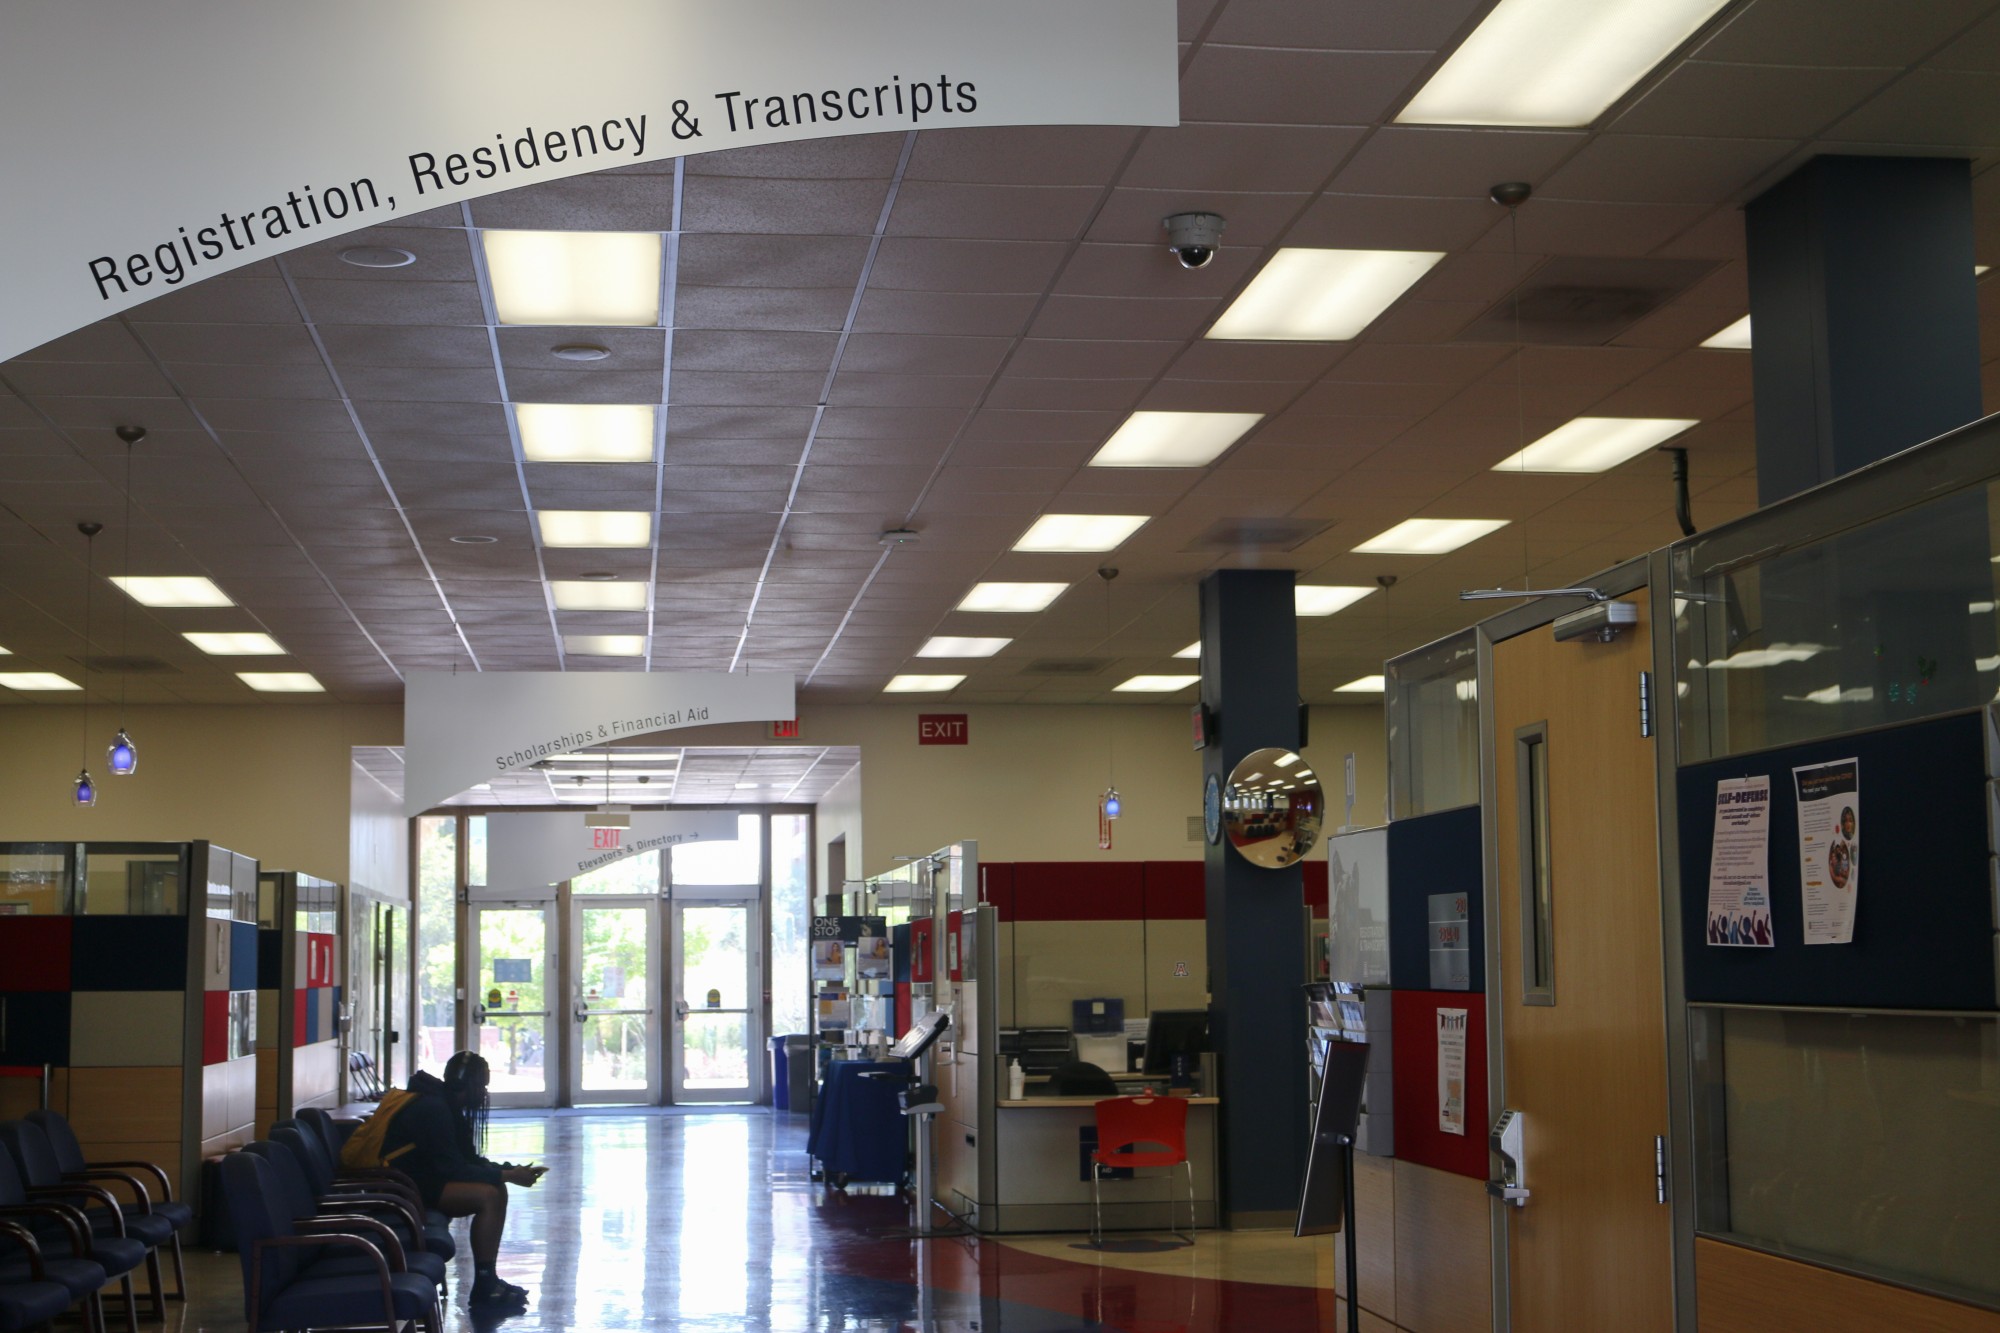 The Office of the Registrar, located inside the University of Arizona Administration Building on the main floor, offers resources to students 8:30 a.m. - 4:30 p.m. Monday through Friday.  